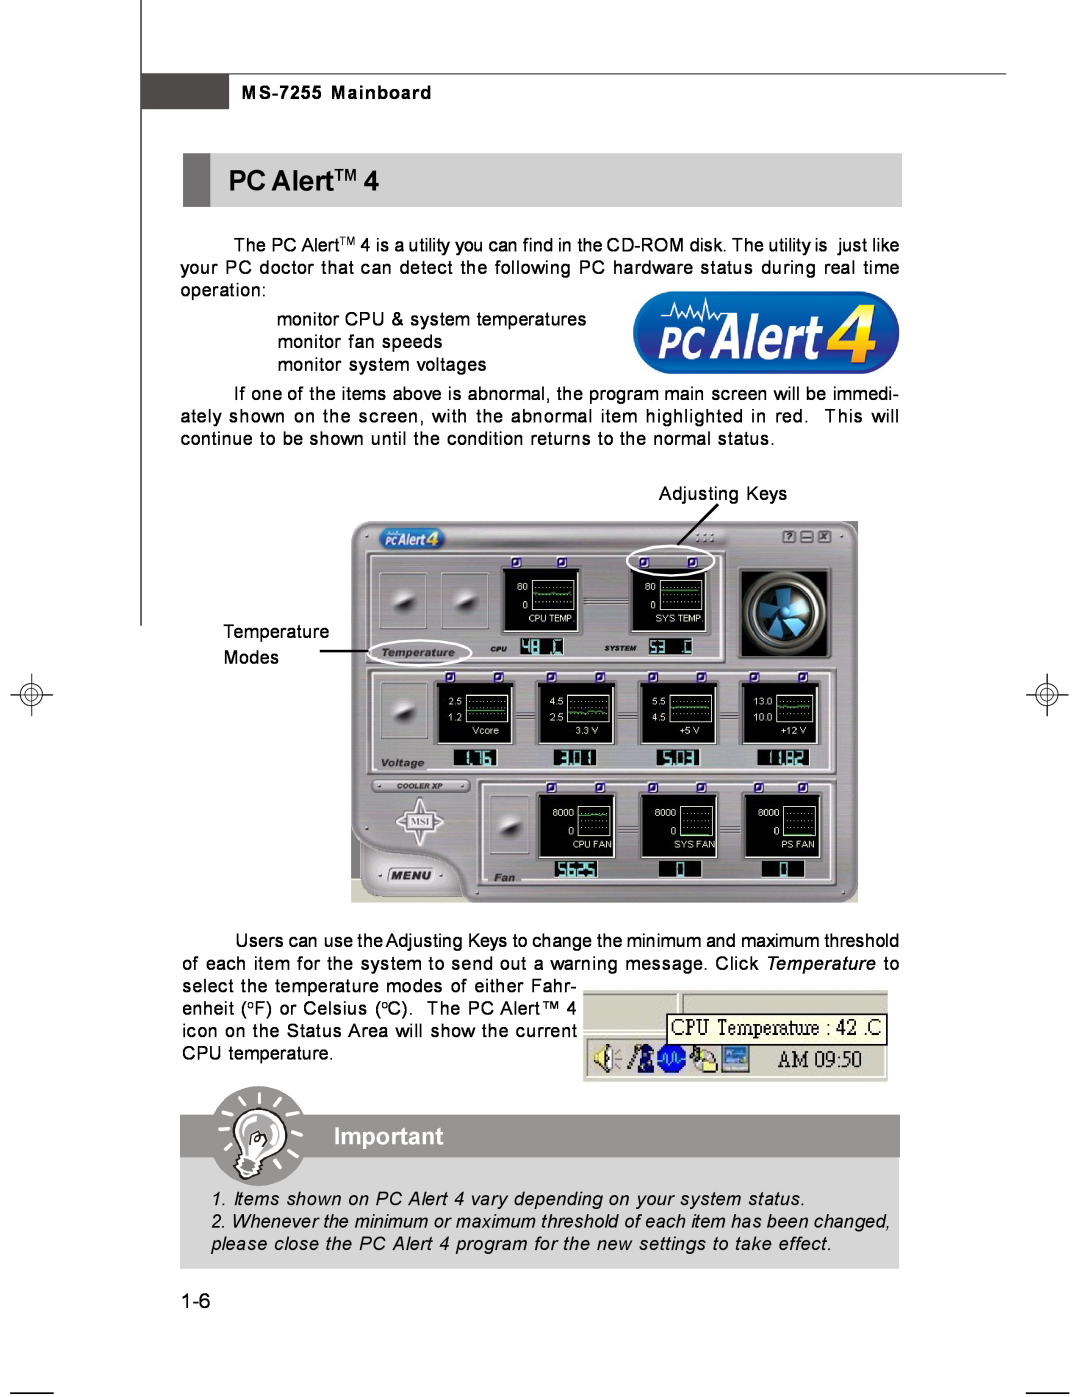 MSI manual PC AlertTM, Items shown on PC Alert 4 vary depending on your system status, MS-7255 Mainboard 